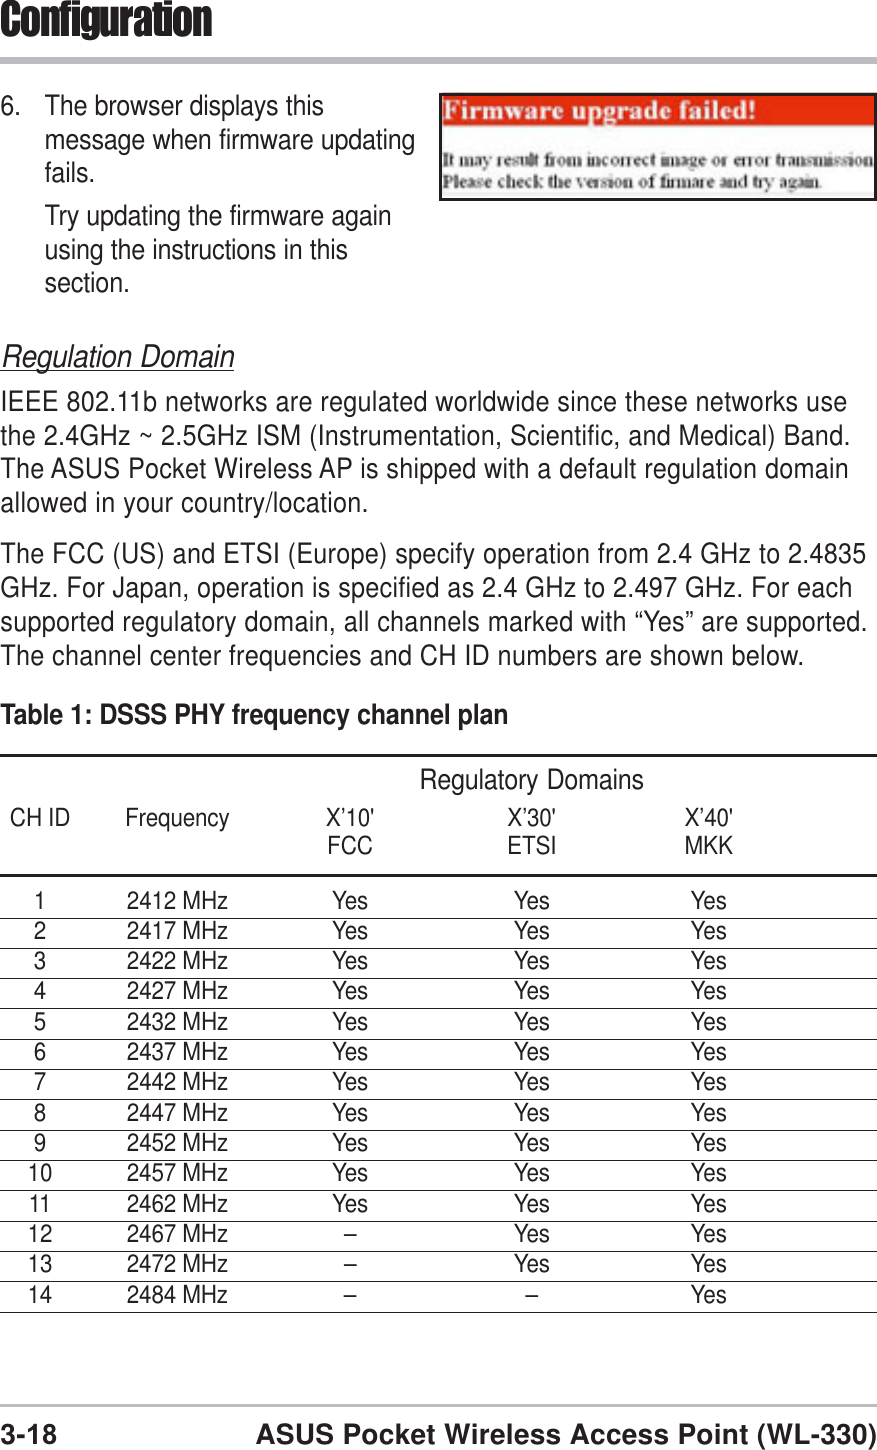 3-18 ASUS Pocket Wireless Access Point (WL-330)ConfigurationRegulation DomainIEEE 802.11b networks are regulated worldwide since these networks usethe 2.4GHz ~ 2.5GHz ISM (Instrumentation, Scientific, and Medical) Band.The ASUS Pocket Wireless AP is shipped with a default regulation domainallowed in your country/location.The FCC (US) and ETSI (Europe) specify operation from 2.4 GHz to 2.4835GHz. For Japan, operation is specified as 2.4 GHz to 2.497 GHz. For eachsupported regulatory domain, all channels marked with “Yes” are supported.The channel center frequencies and CH ID numbers are shown below.Table 1: DSSS PHY frequency channel planRegulatory DomainsCH ID Frequency X’10&apos; X’30&apos; X’40&apos;FCC ETSI MKK1 2412 MHz Yes Yes Yes2 2417 MHz Yes Yes Yes3 2422 MHz Yes Yes Yes4 2427 MHz Yes Yes Yes5 2432 MHz Yes Yes Yes6 2437 MHz Yes Yes Yes7 2442 MHz Yes Yes Yes8 2447 MHz Yes Yes Yes9 2452 MHz Yes Yes Yes10 2457 MHz Yes Yes Yes11 2462 MHz Yes Yes Yes12 2467 MHz – Yes Yes13 2472 MHz – Yes Yes14 2484 MHz – – Yes6. The browser displays thismessage when firmware updatingfails.Try updating the firmware againusing the instructions in thissection.